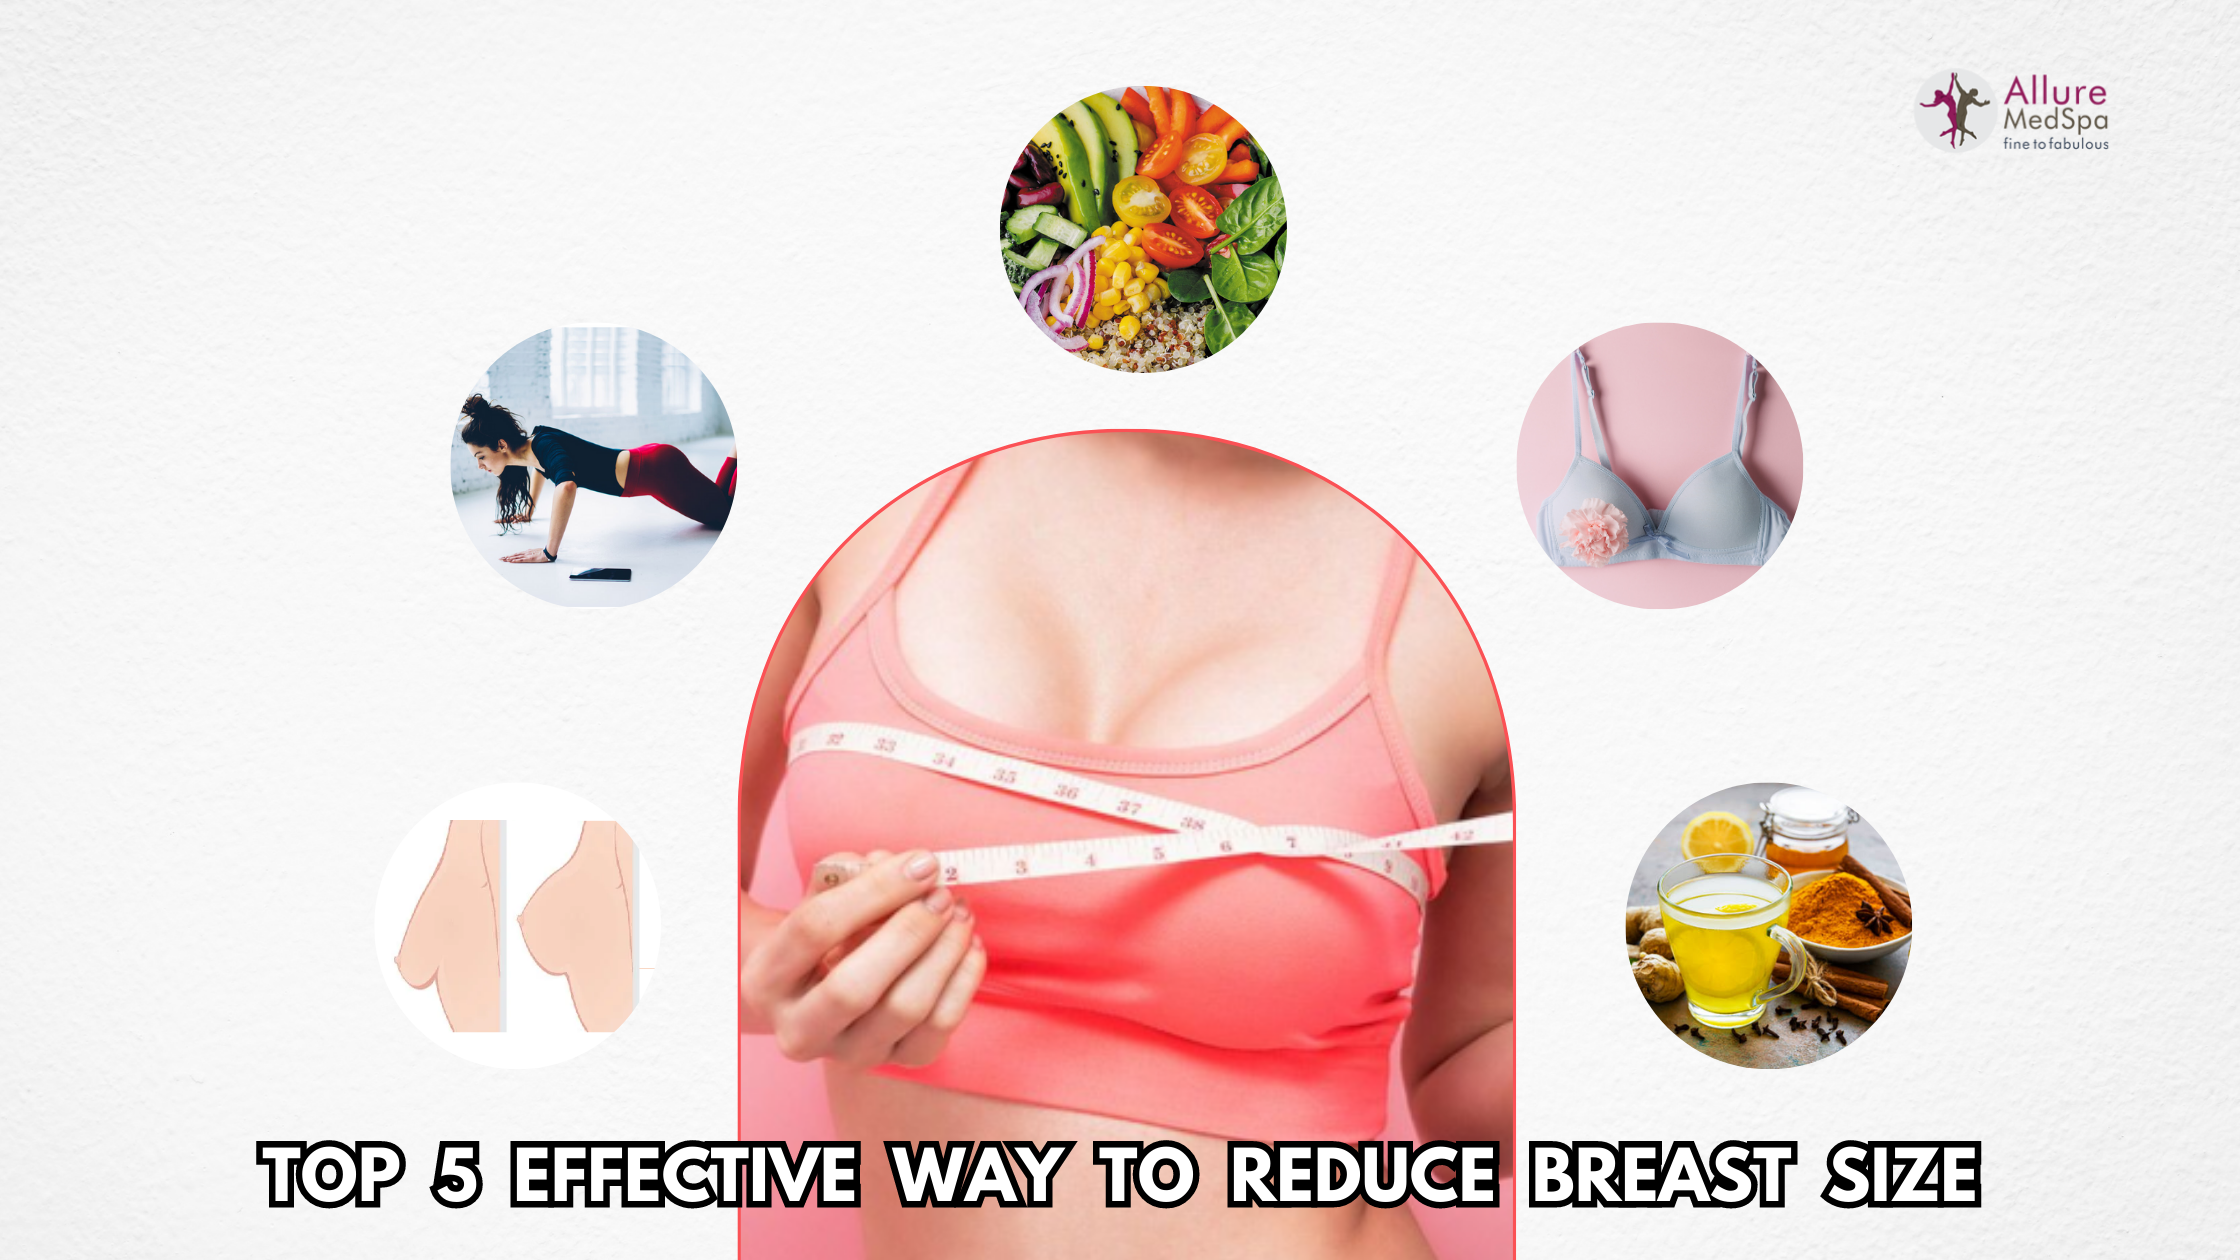 How to Reduce Your Breast Size: Find Five Most Effective Ways